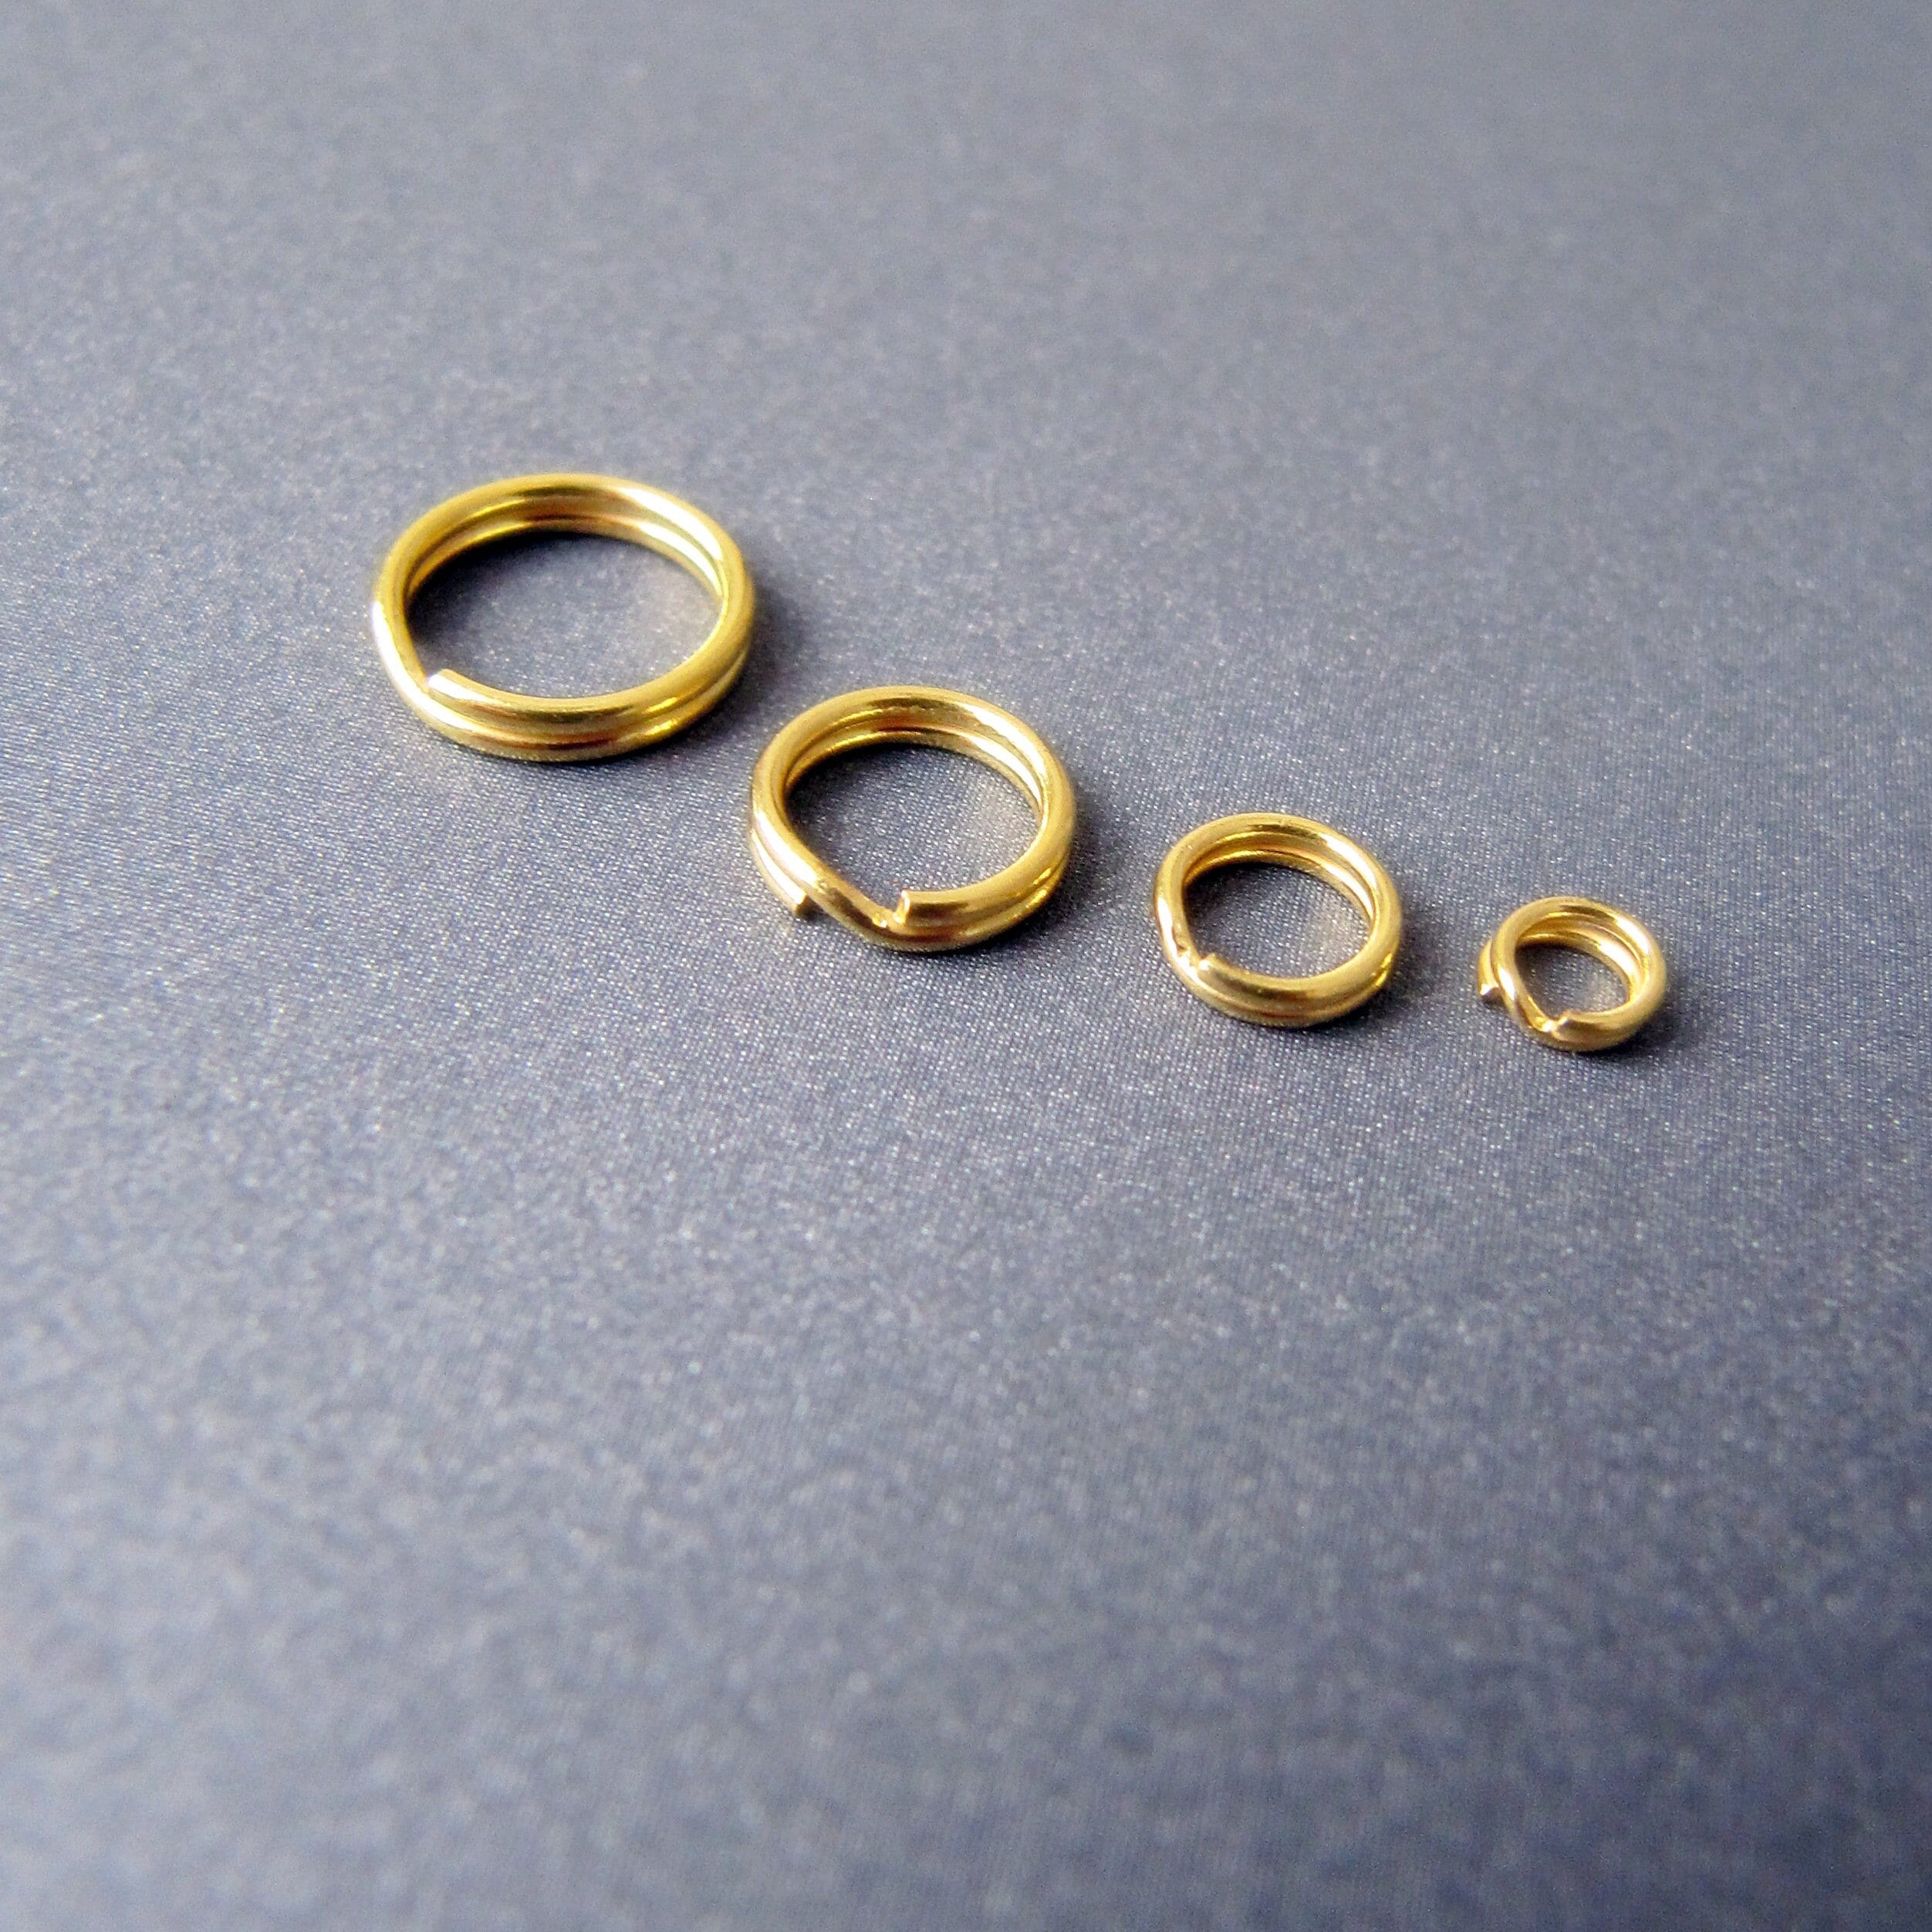  112pcs 18K Gold Filled Jump Rings,Dainty O Shaped Open Jump  Rings Bulk,Gold Split Rings for Earring Bracelet Necklace Pendant DIY  Jewelry Craft Making Supply Findings